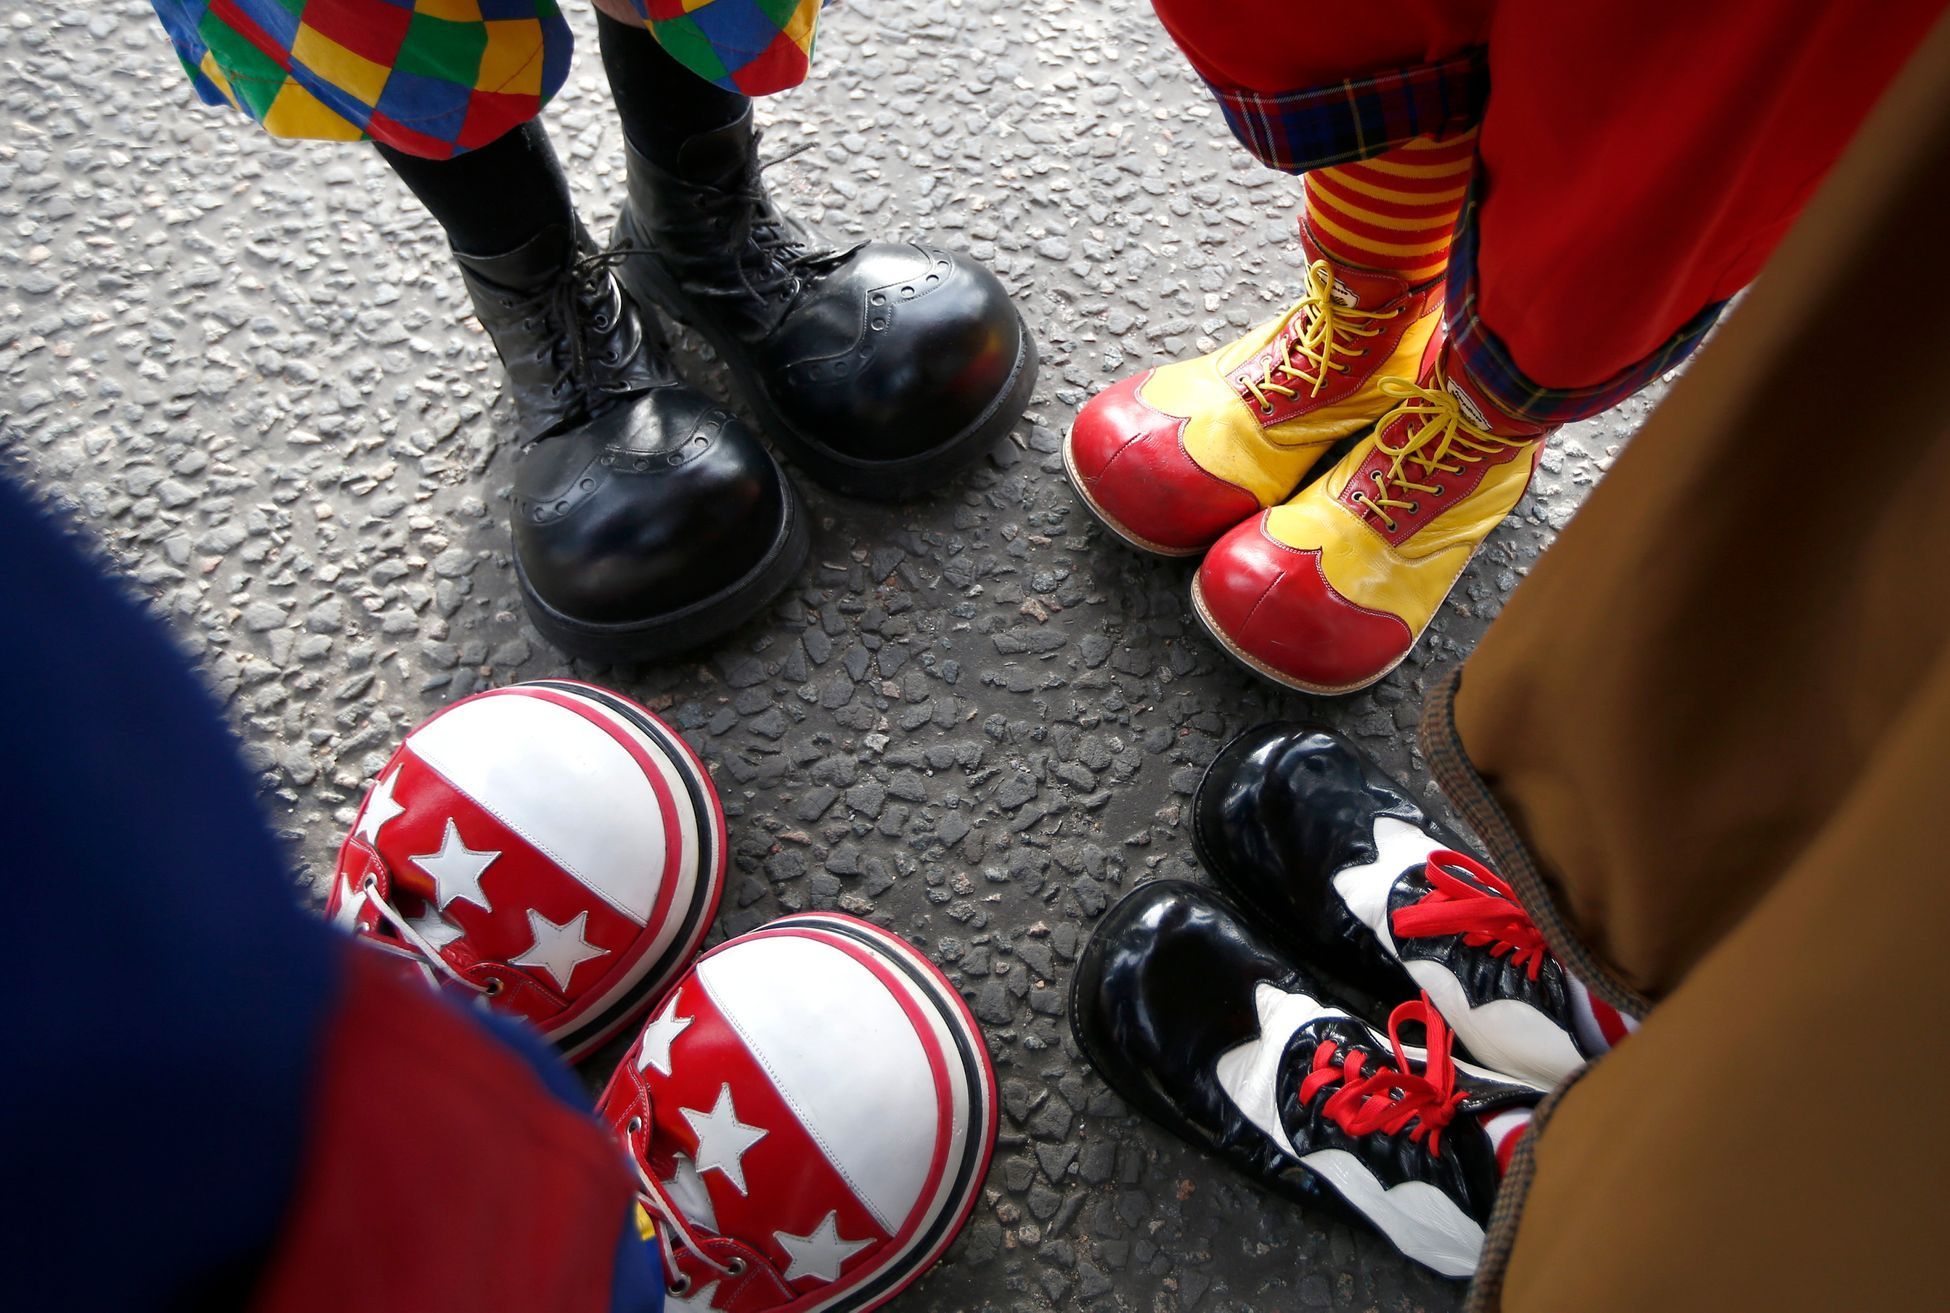 Clowns stand together as they compare their shoes outside the All Saints Church before the Grimaldi clown service in Dalston, north London